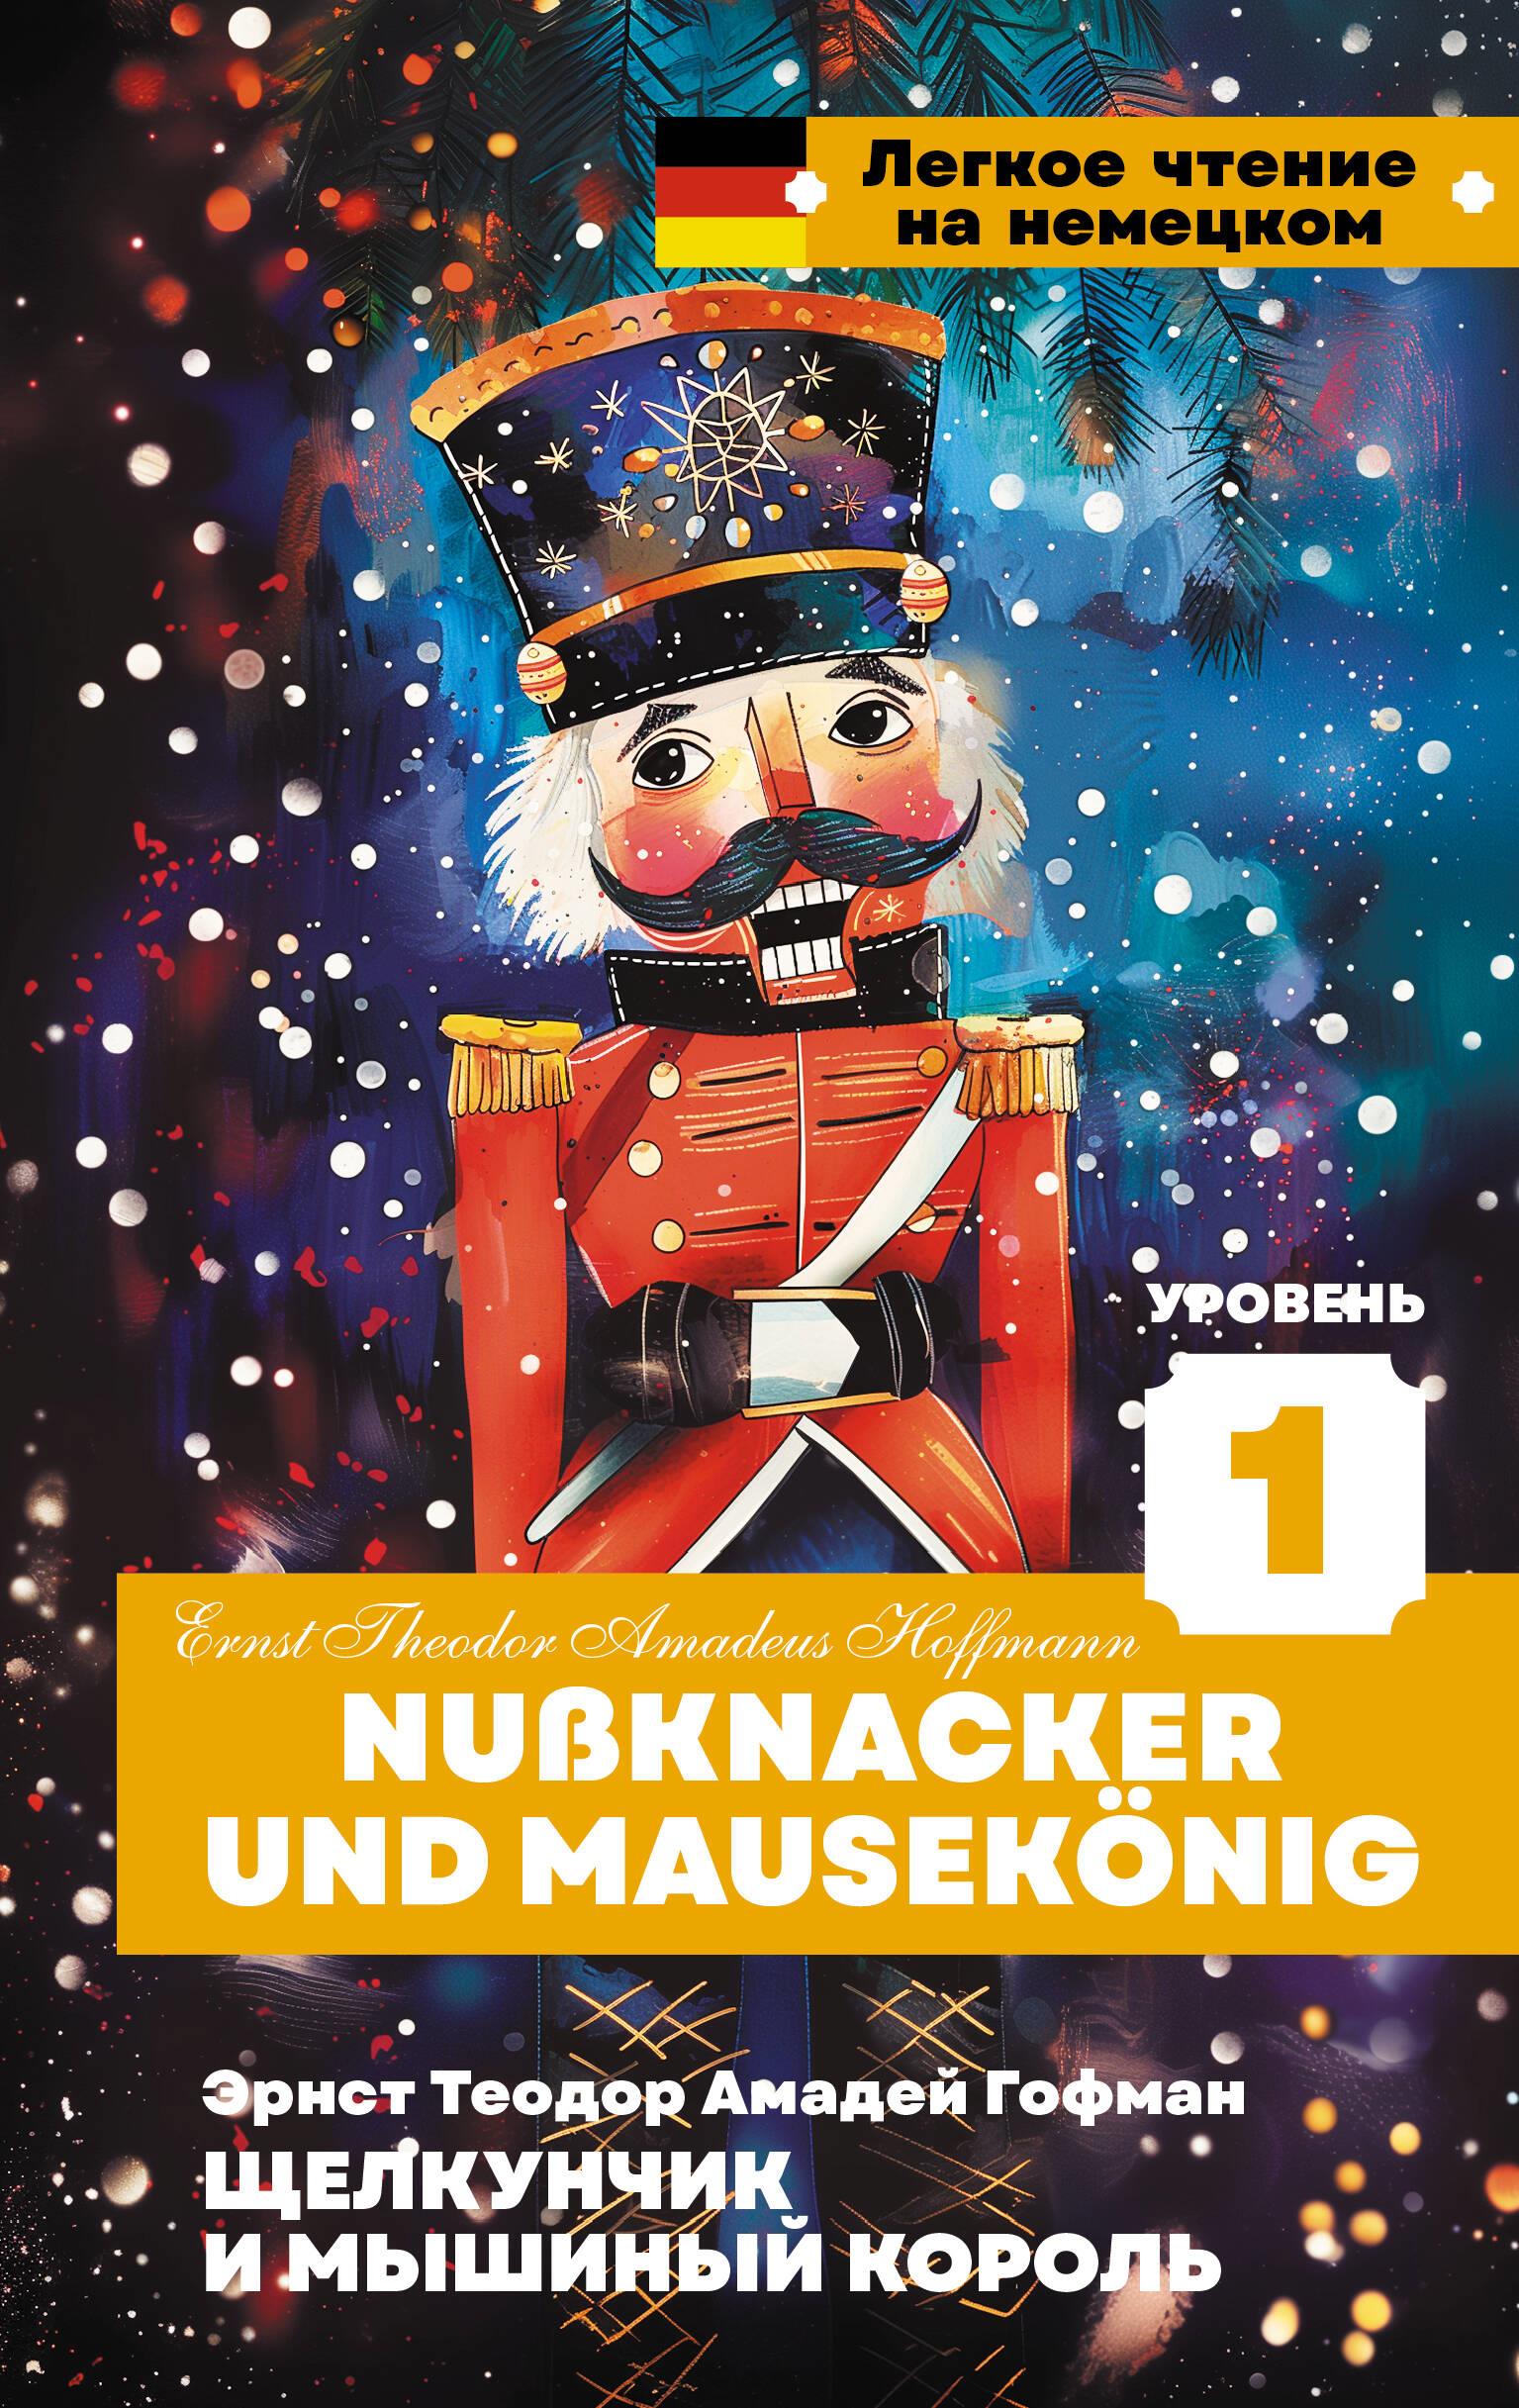 The Nutcracker and the Mouse King. Level 1 = Nussknacker und Mausekonig